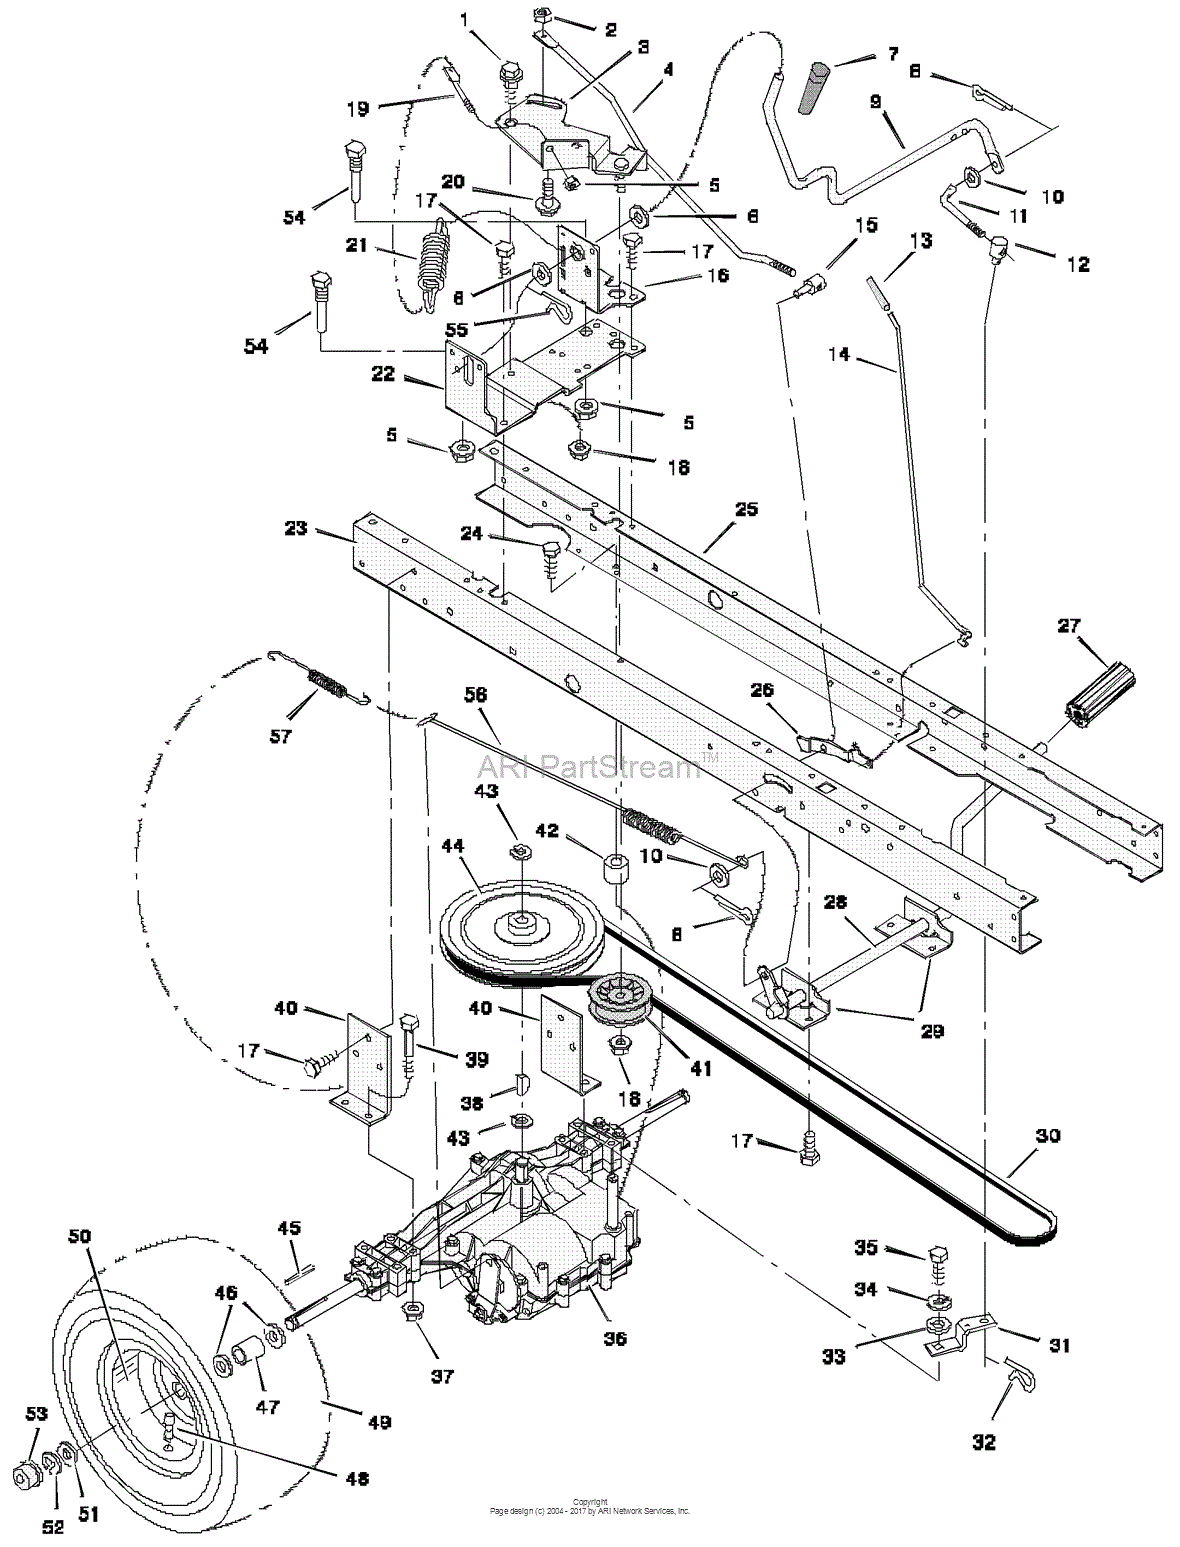 Murray 38500x92A - Lawn Tractor (1997) Parts Diagram for Motion Drive